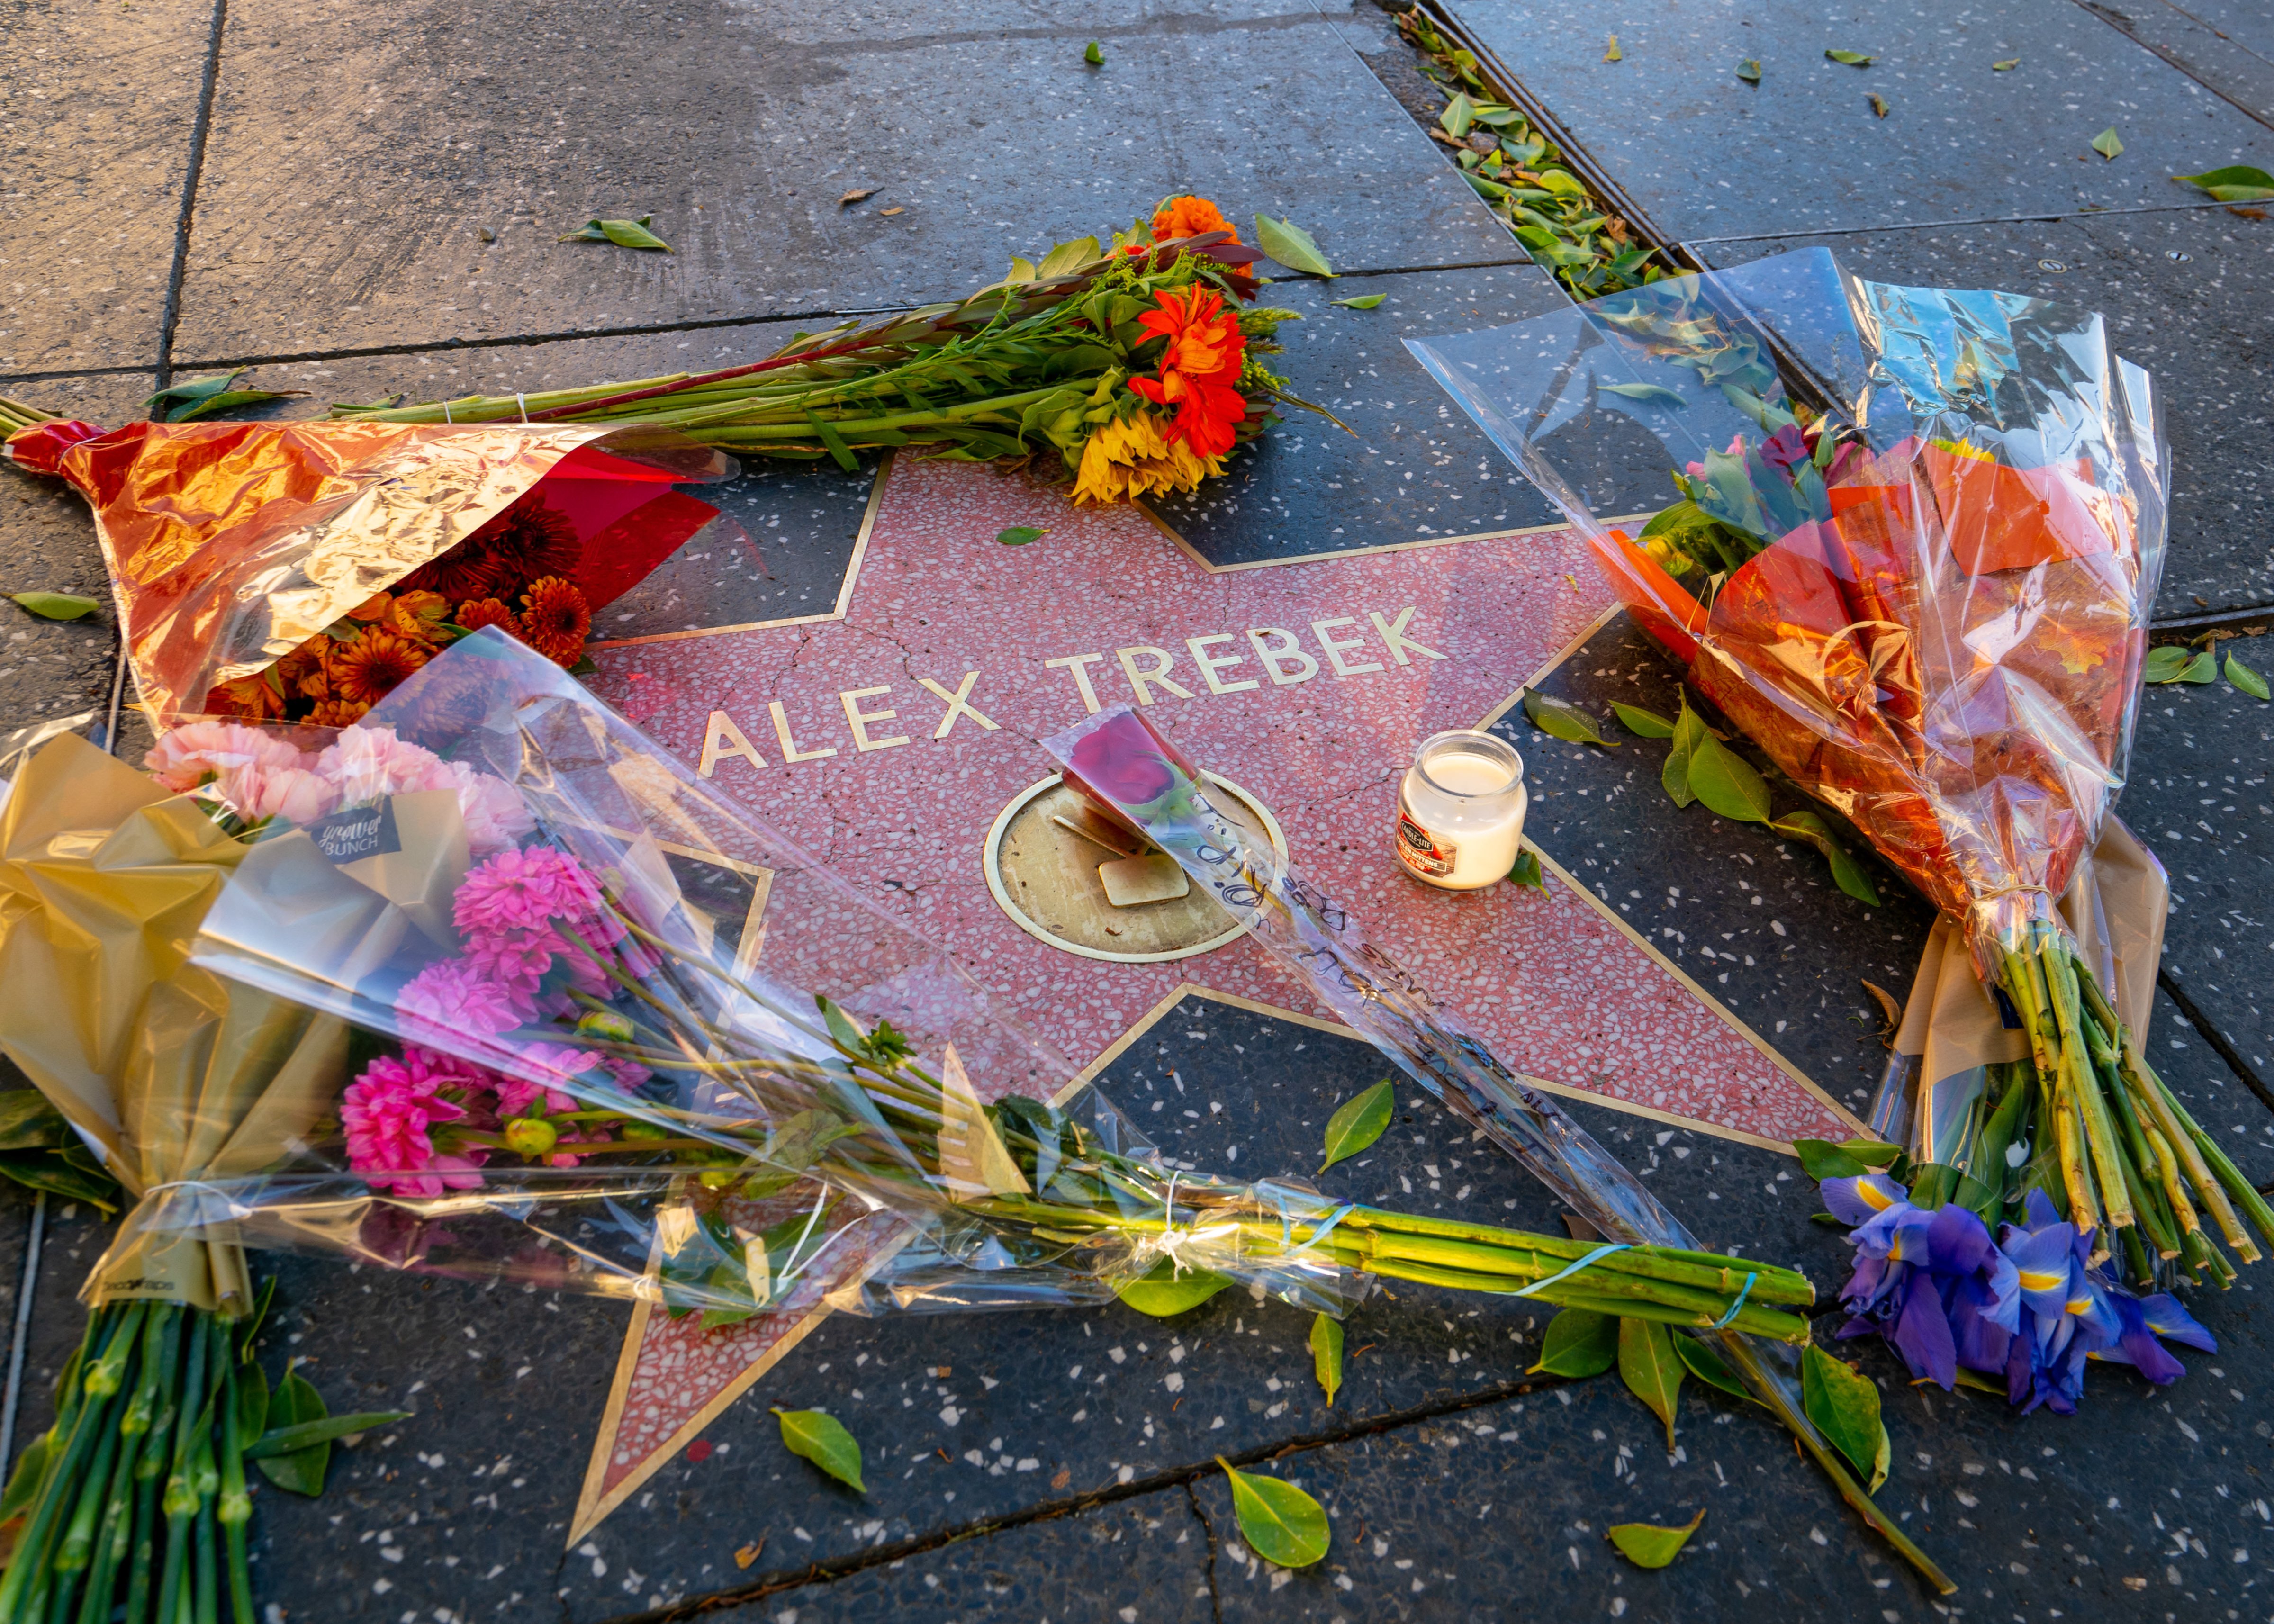 Hollywood honors Alex Trebek on the Walk of Fame after the announcement of his death on Nov. 8, 2020. (GC Images—2020 Bauer-Griffin)